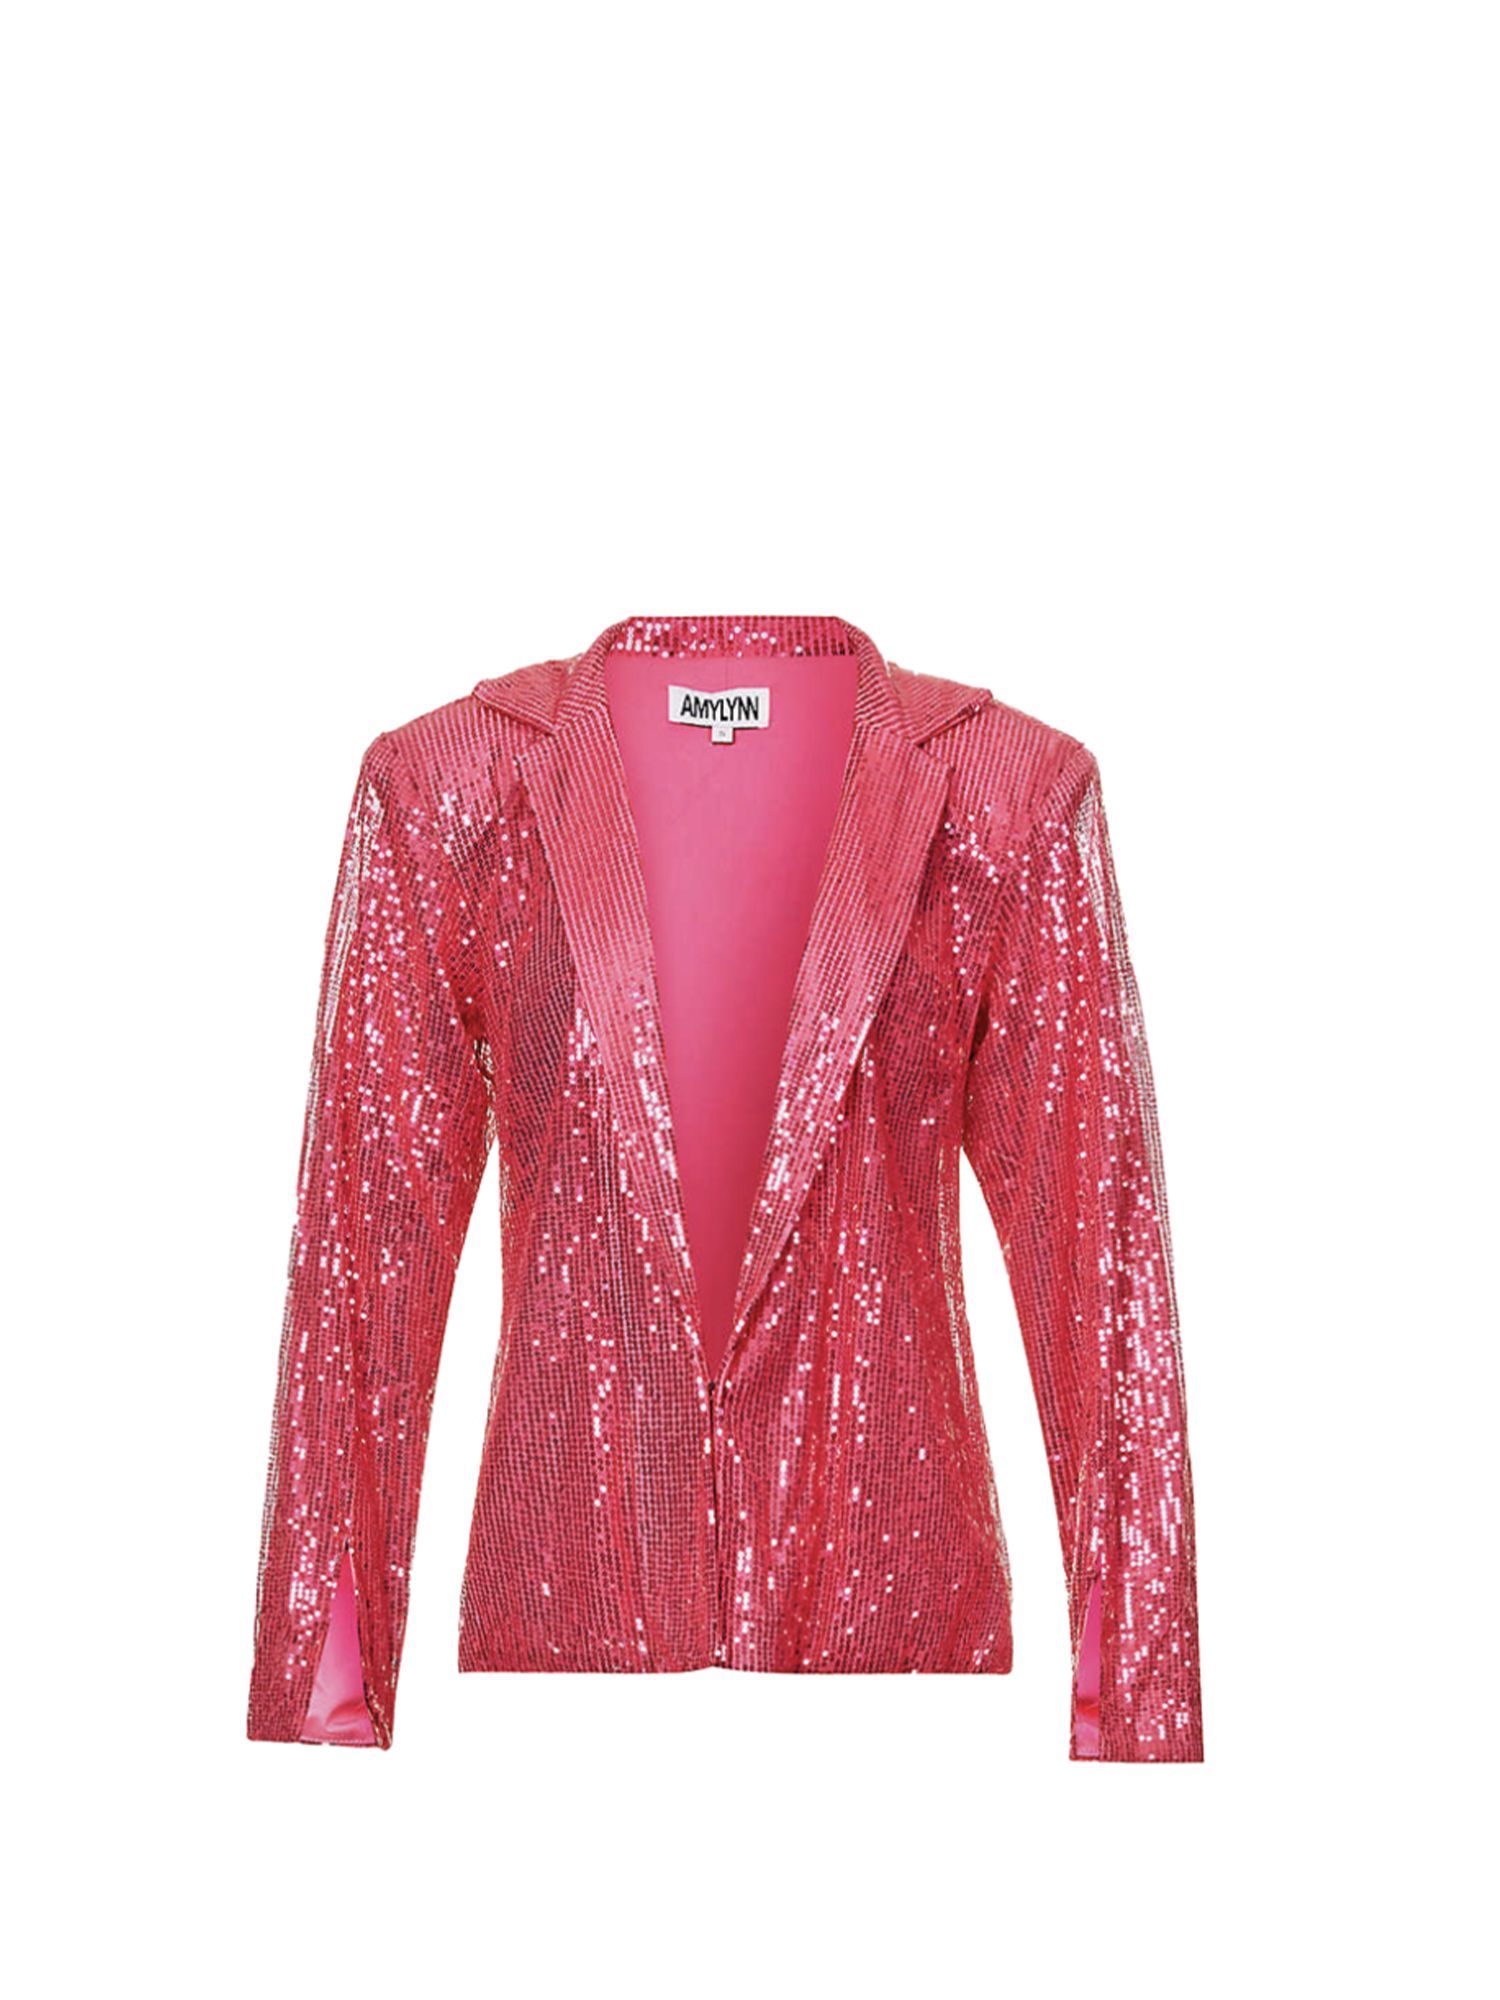 Glittery Sequin Womens Fashion Jackets Elegant Long Sleeve Short Coat For  Office And Spring Streetwear From Huafei06, $21.89 | DHgate.Com